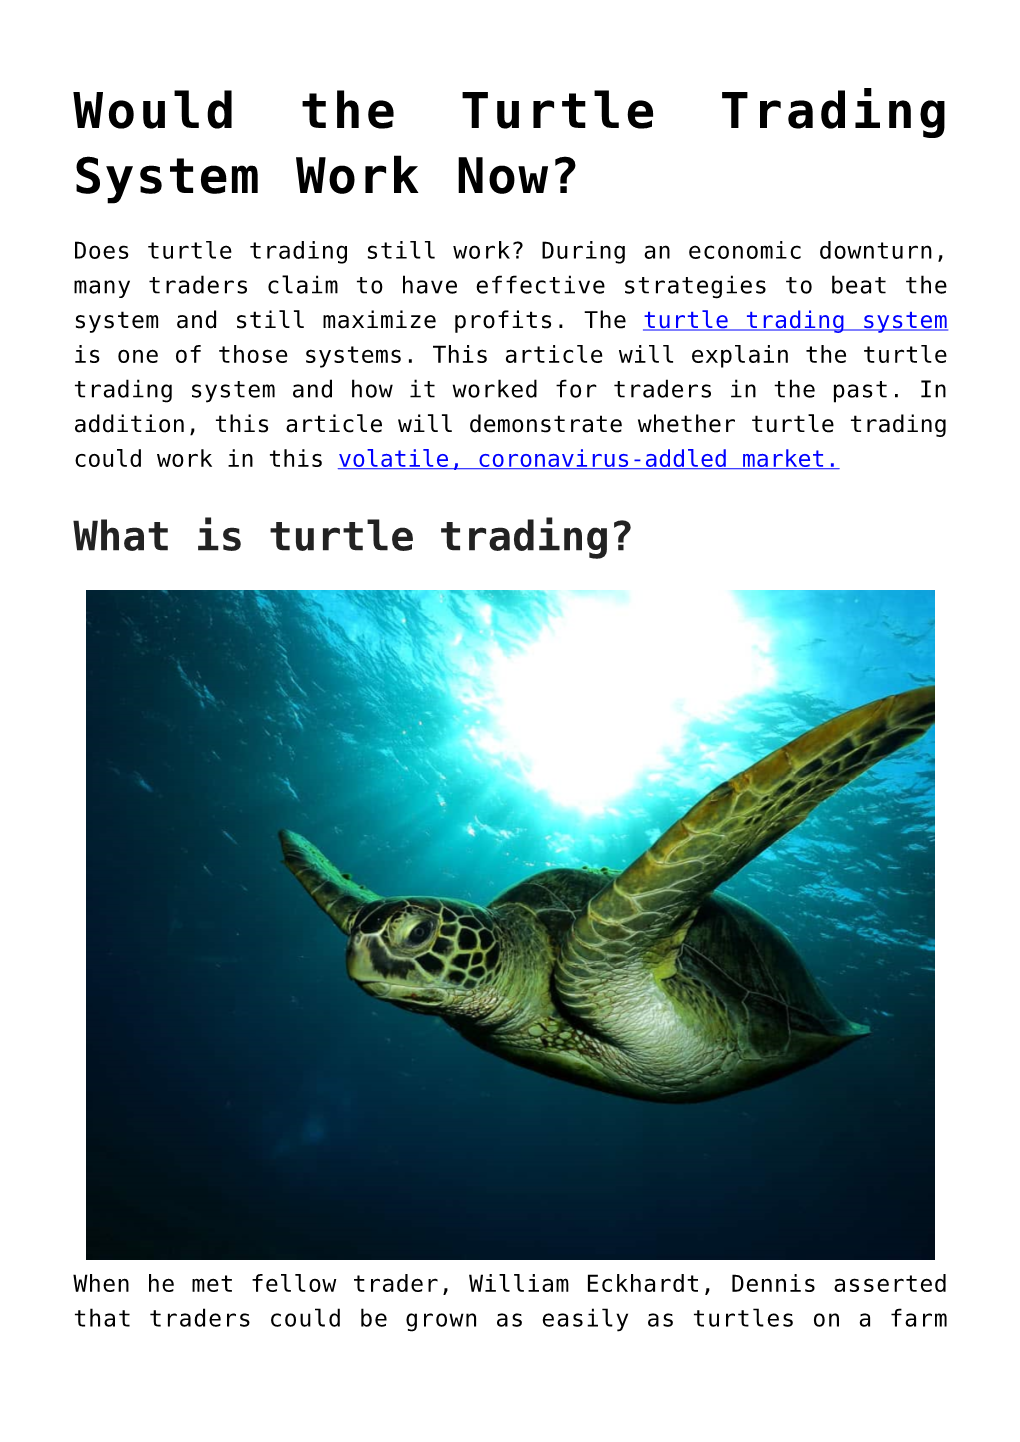 Would the Turtle Trading System Work Now?